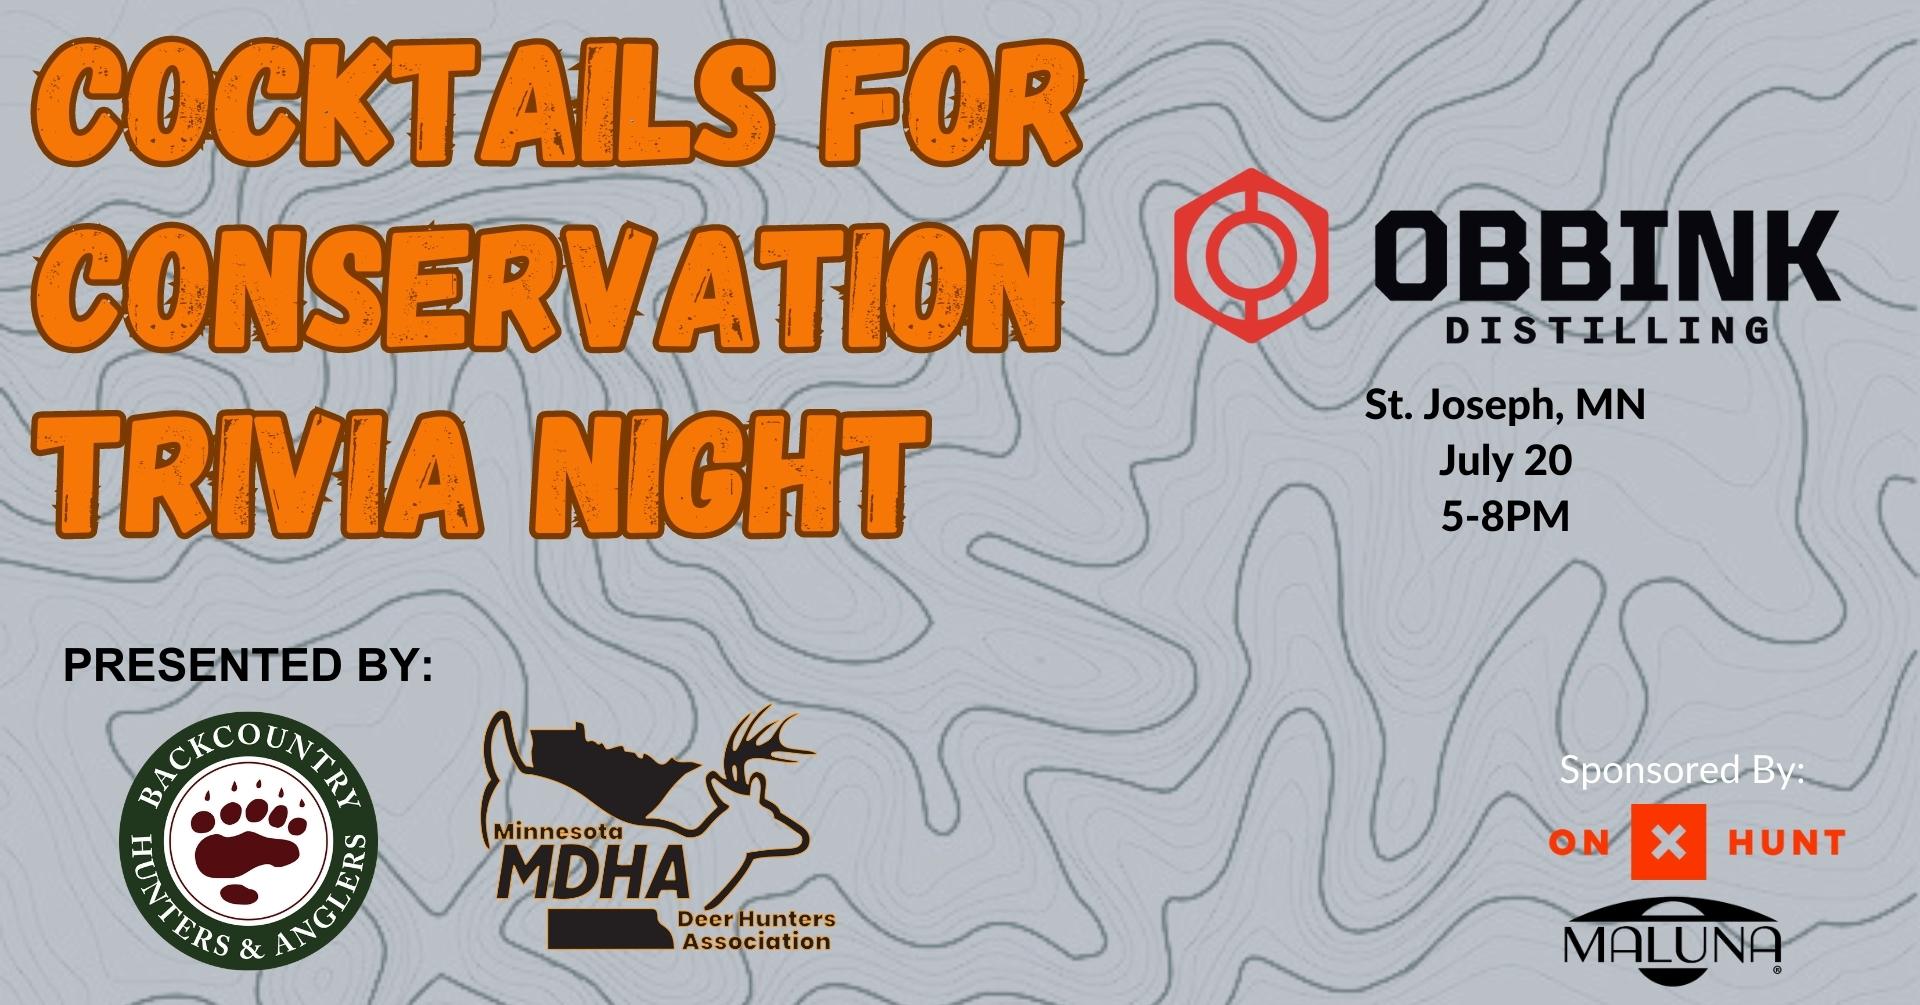 COCKTAILS FOR CONSERVATION TRIVIA NIGHT- PRESENTED BY ONX HUNT